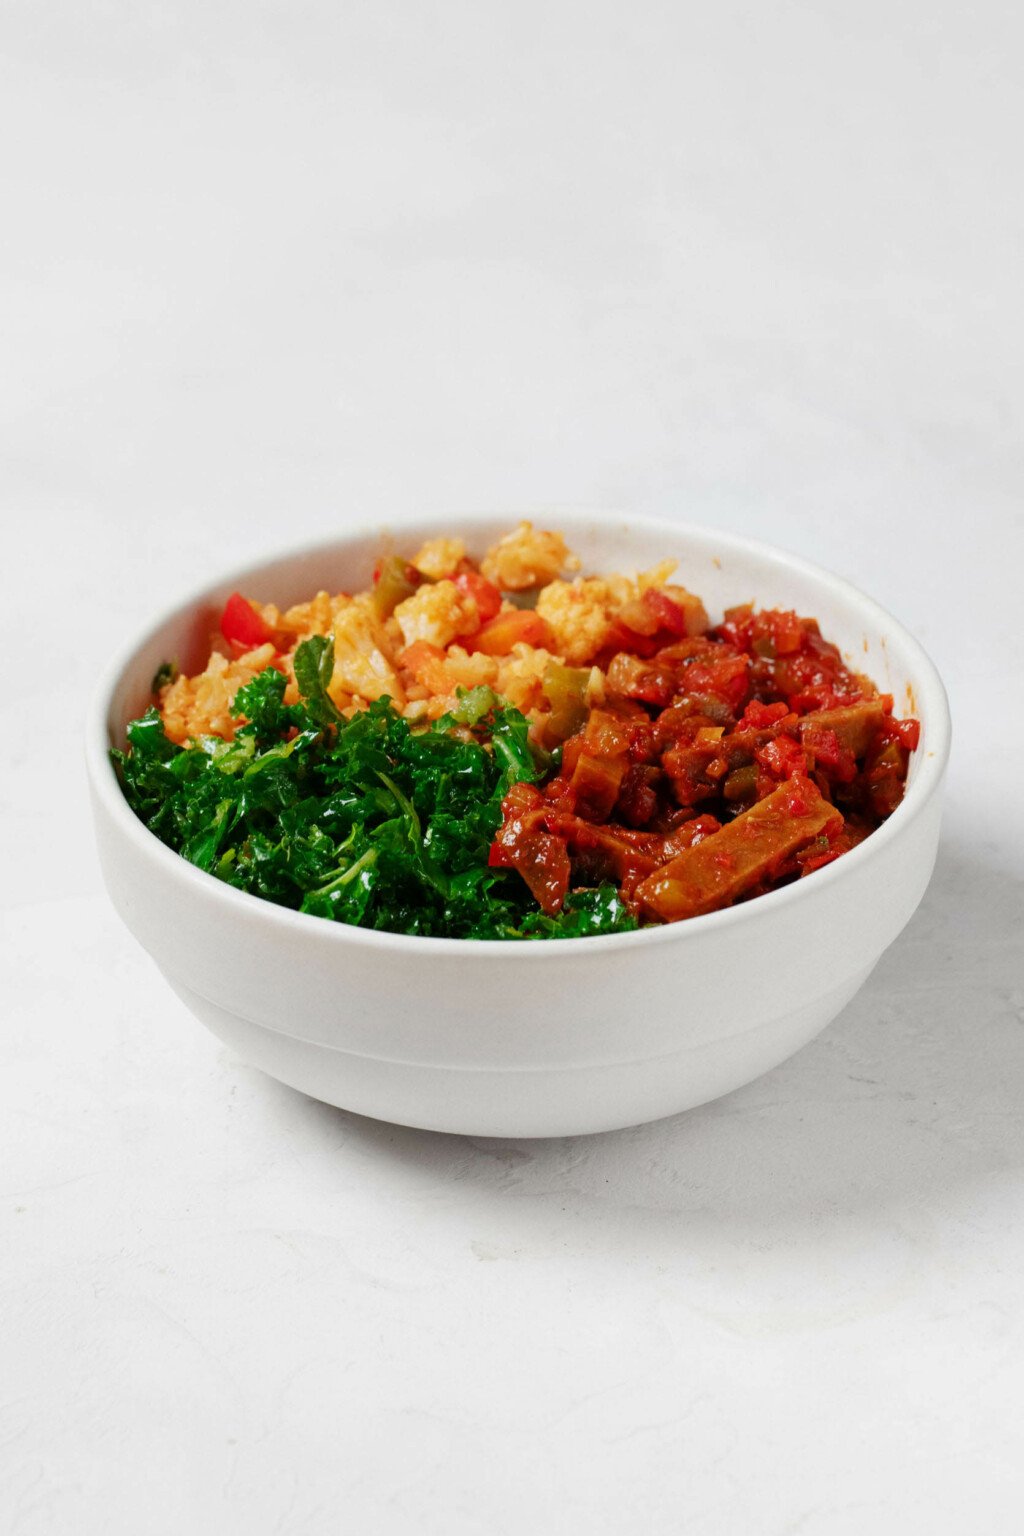 An image of a round white bowl, which has been filled with a colorful arrangement of rice, vegetables, spiced seitan, and curly green kale.